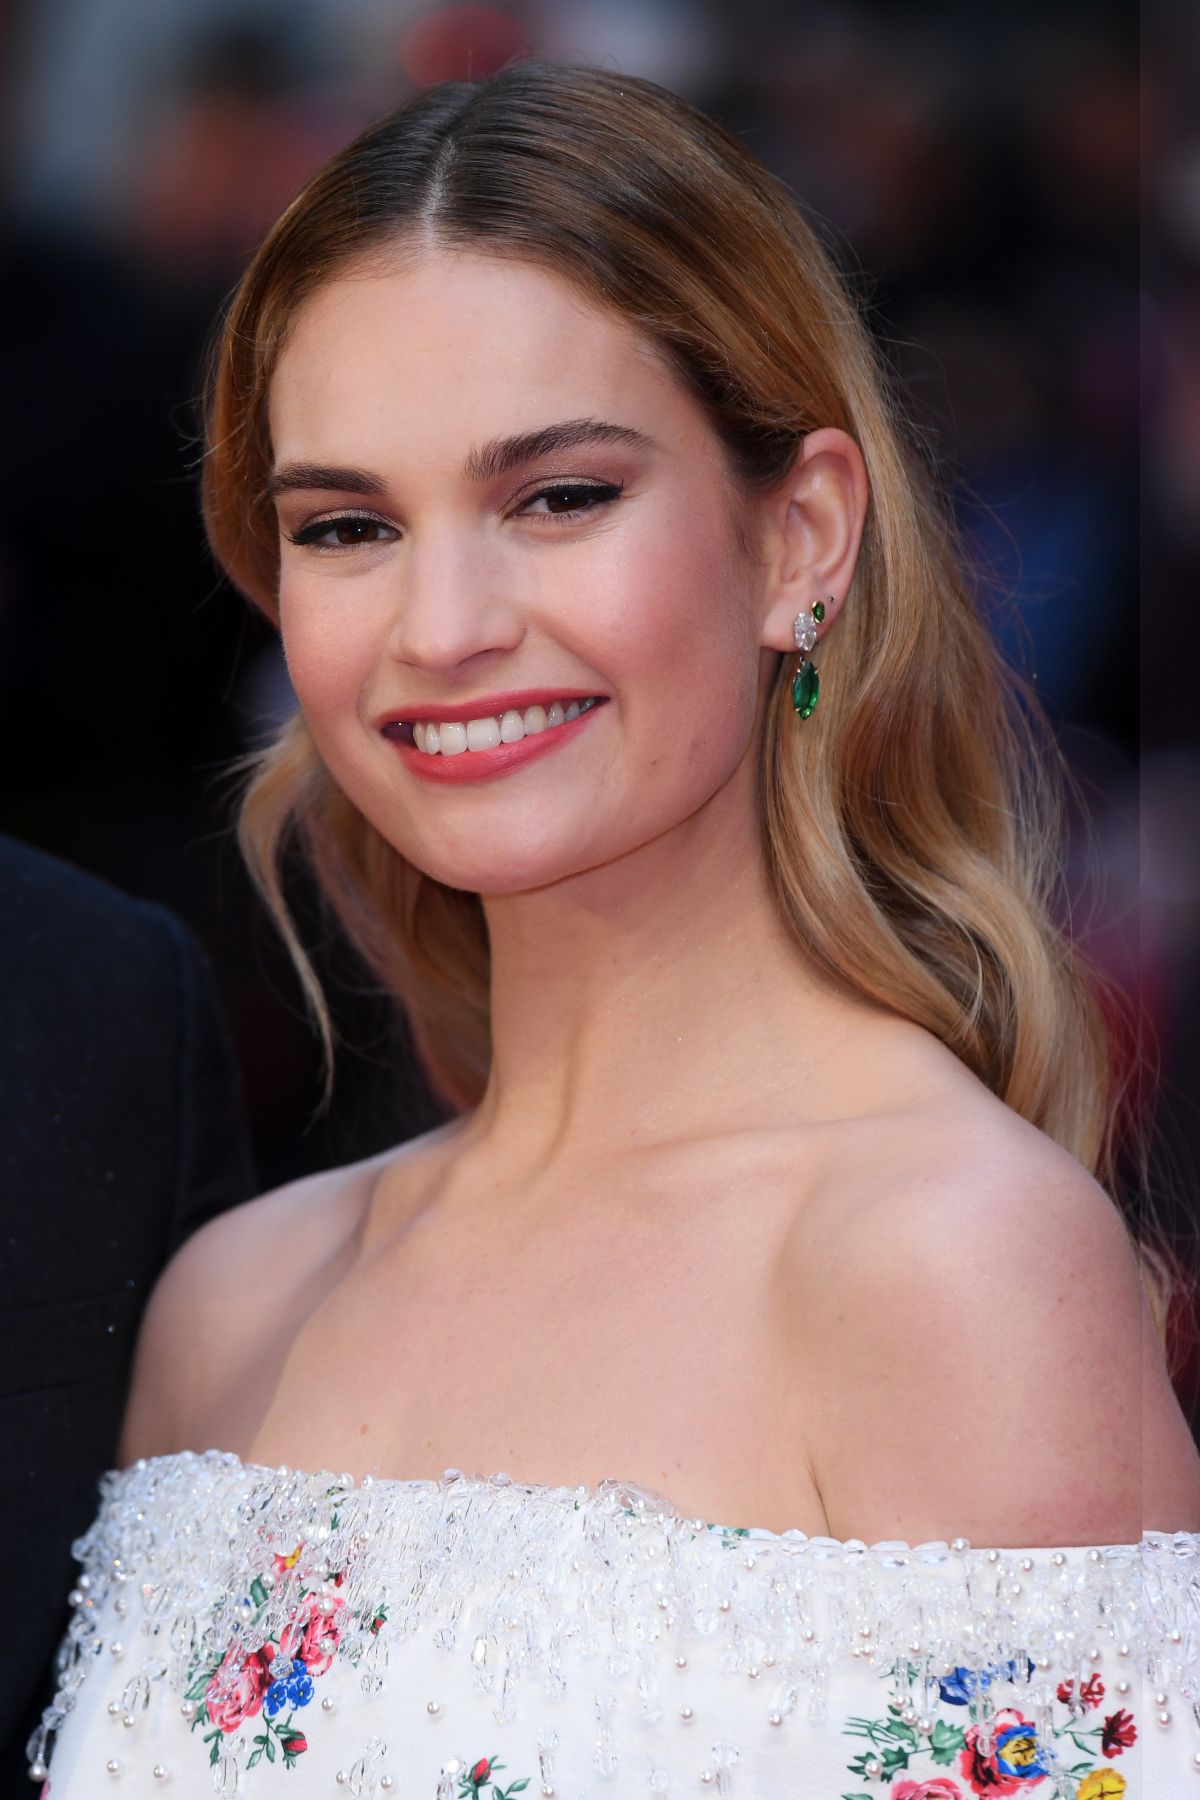 Lily James - Wiki, Biography, Family, Career, Relationships, Net Worth ...